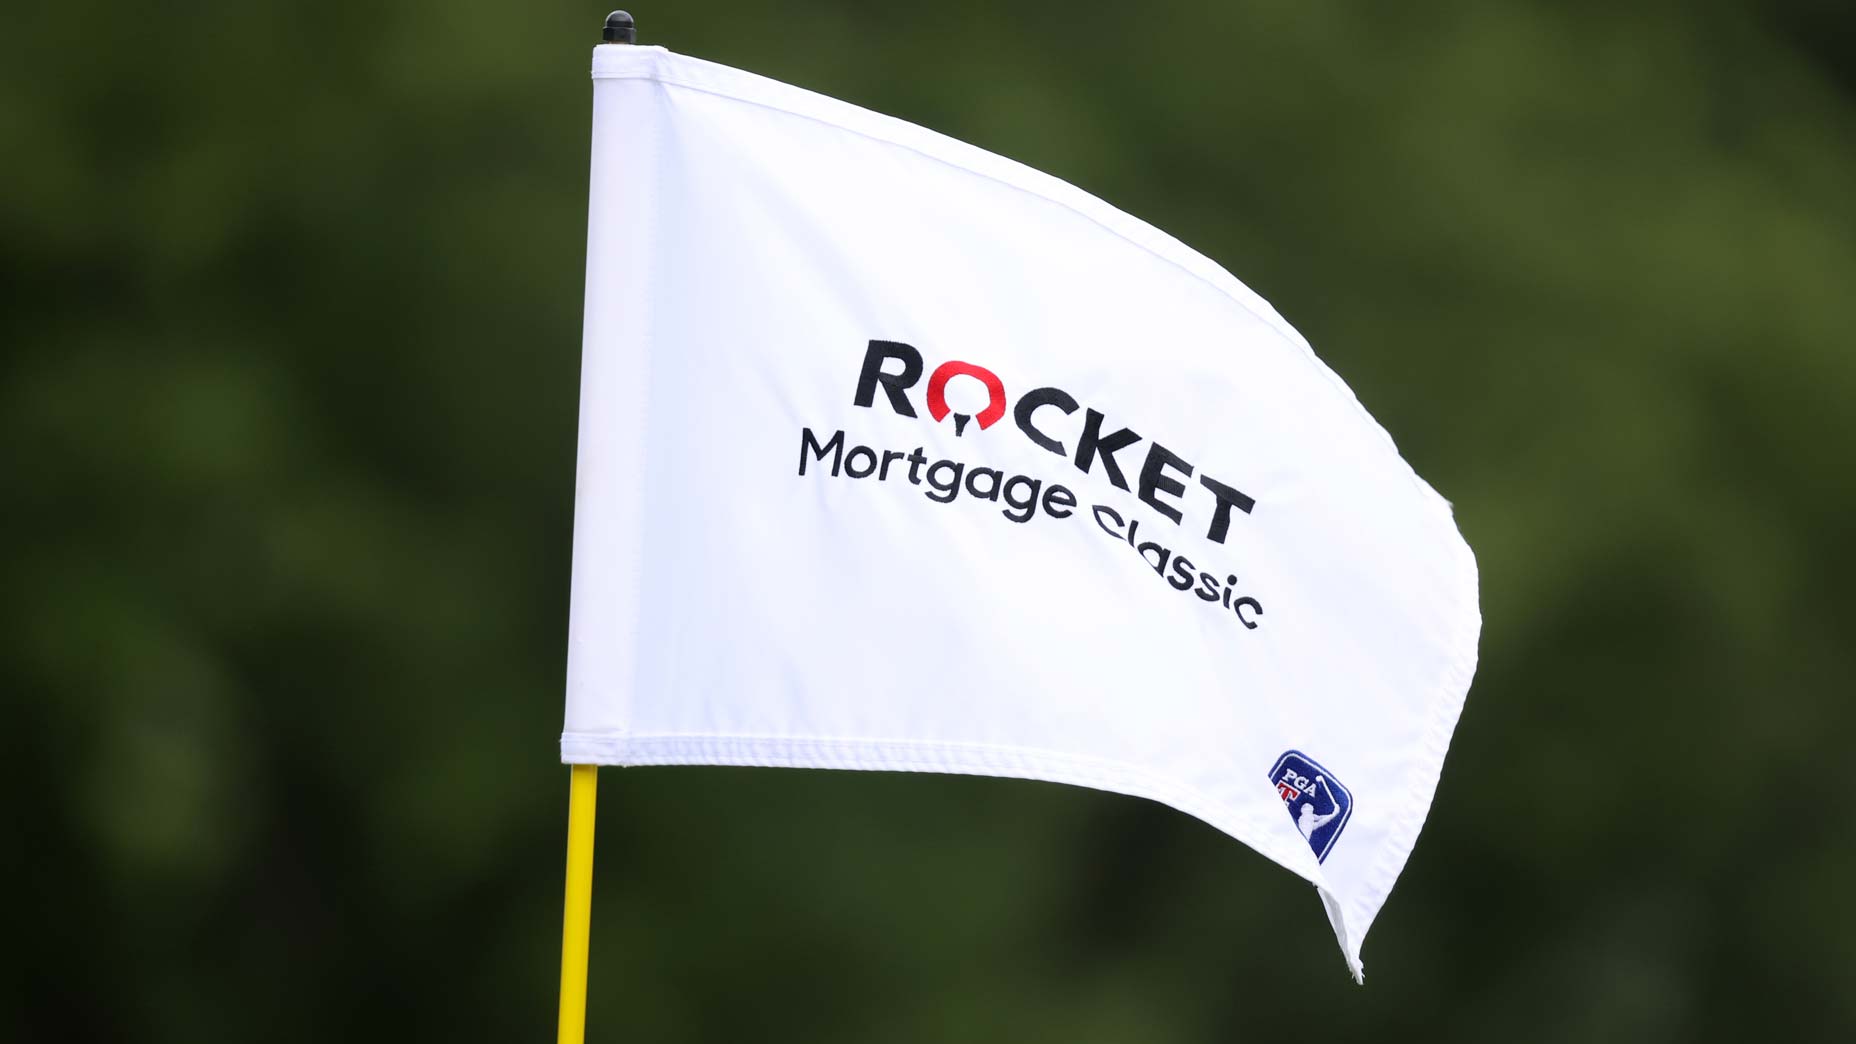 Rocket mortgage classic gear information